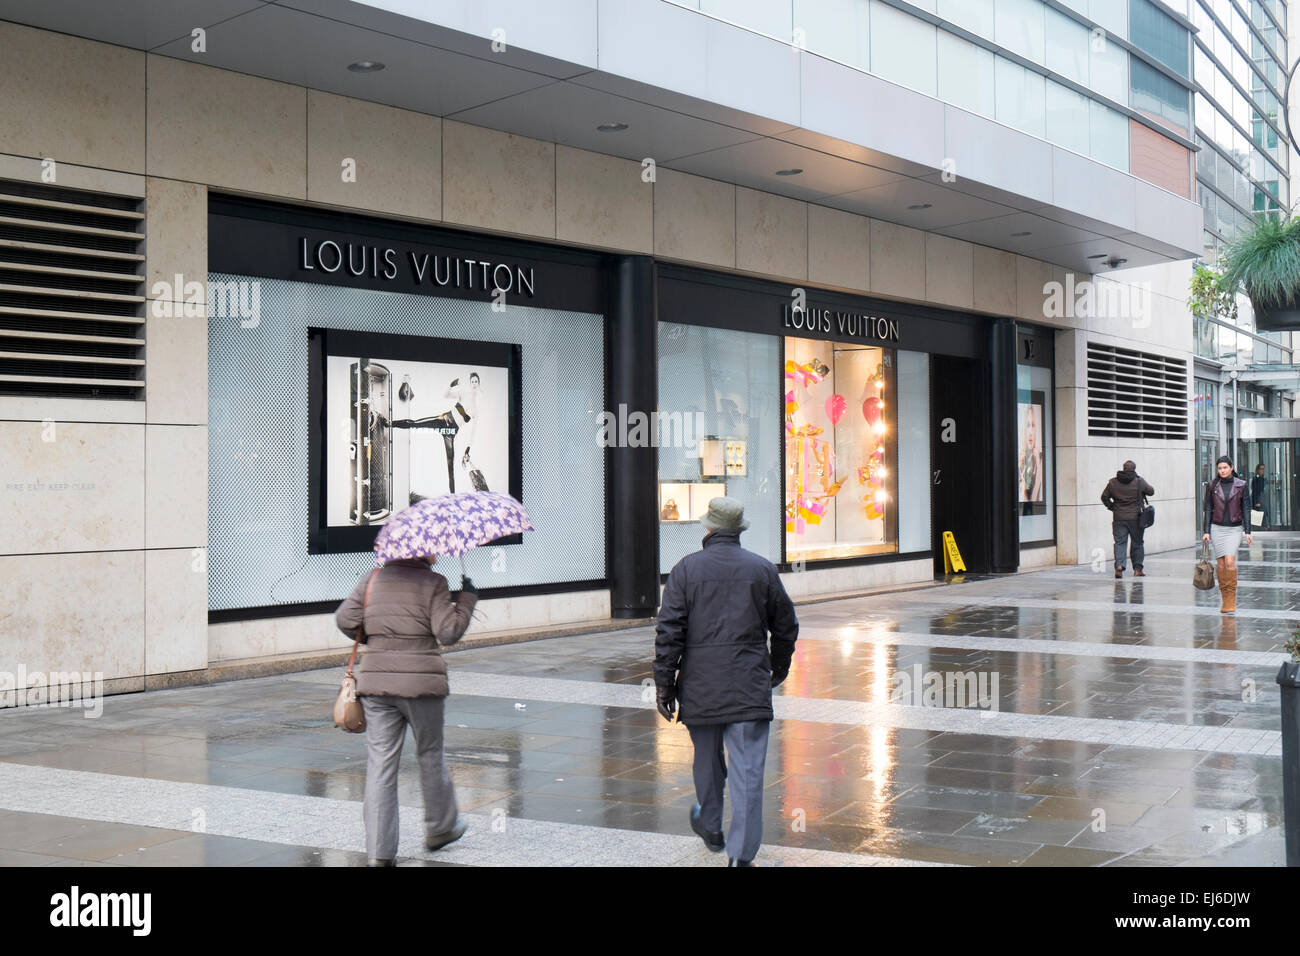 Louis vuitton shop store in manchester city centre, Manchester Stock Photo, Royalty Free Image ...